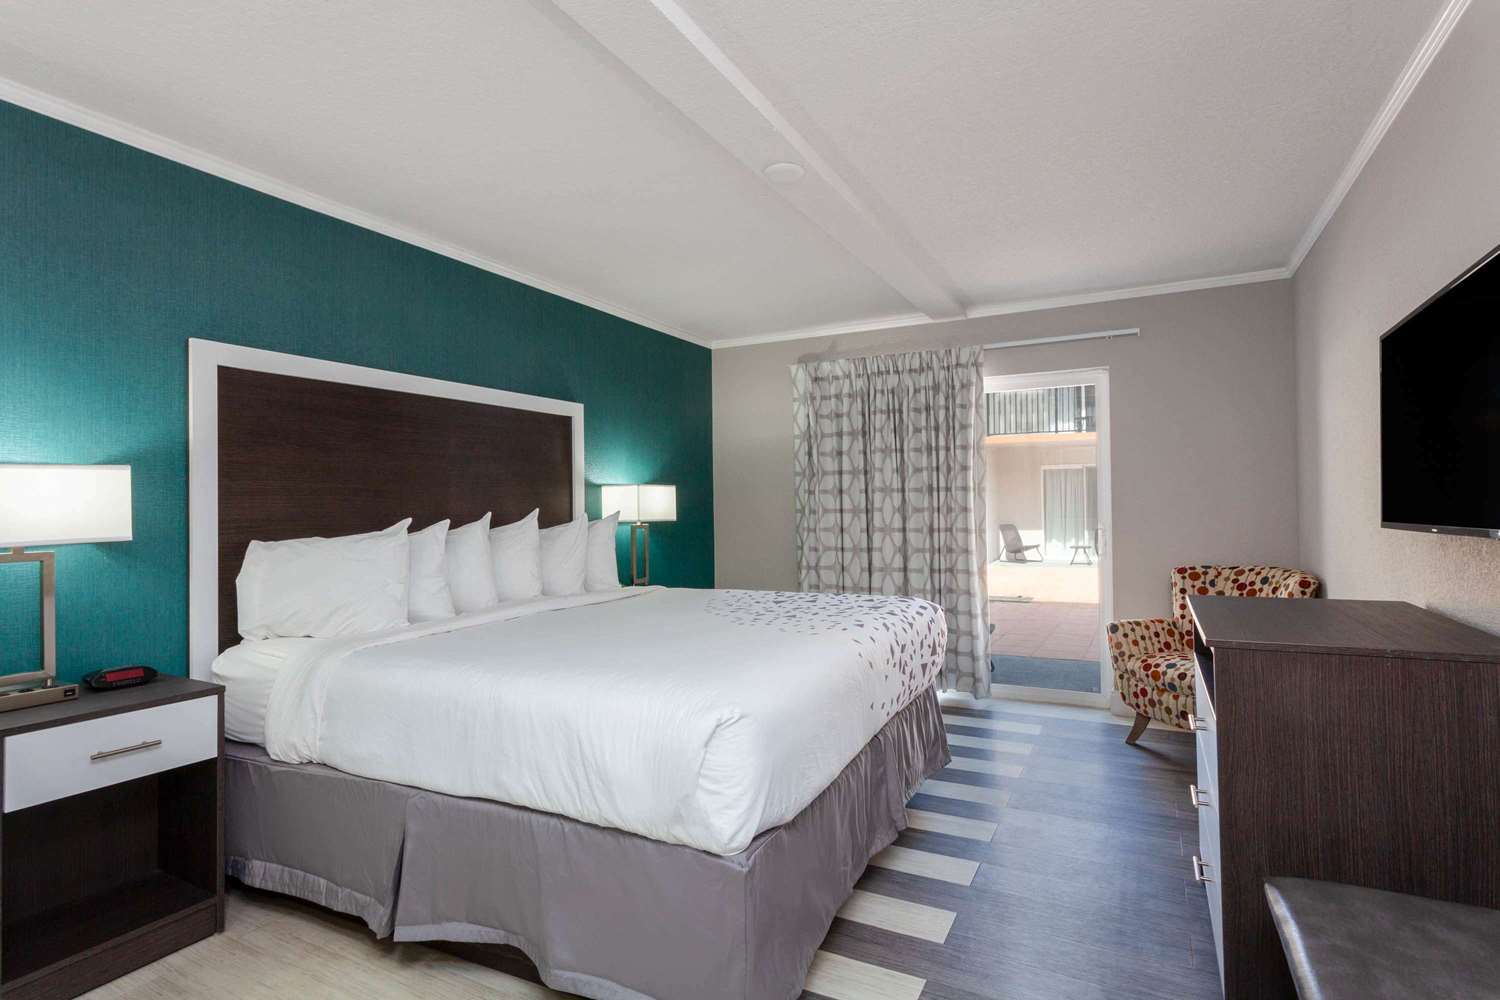 Walmart was so close to this hotel. - Picture of Ramada by Wyndham Kissimmee  Gateway - Tripadvisor